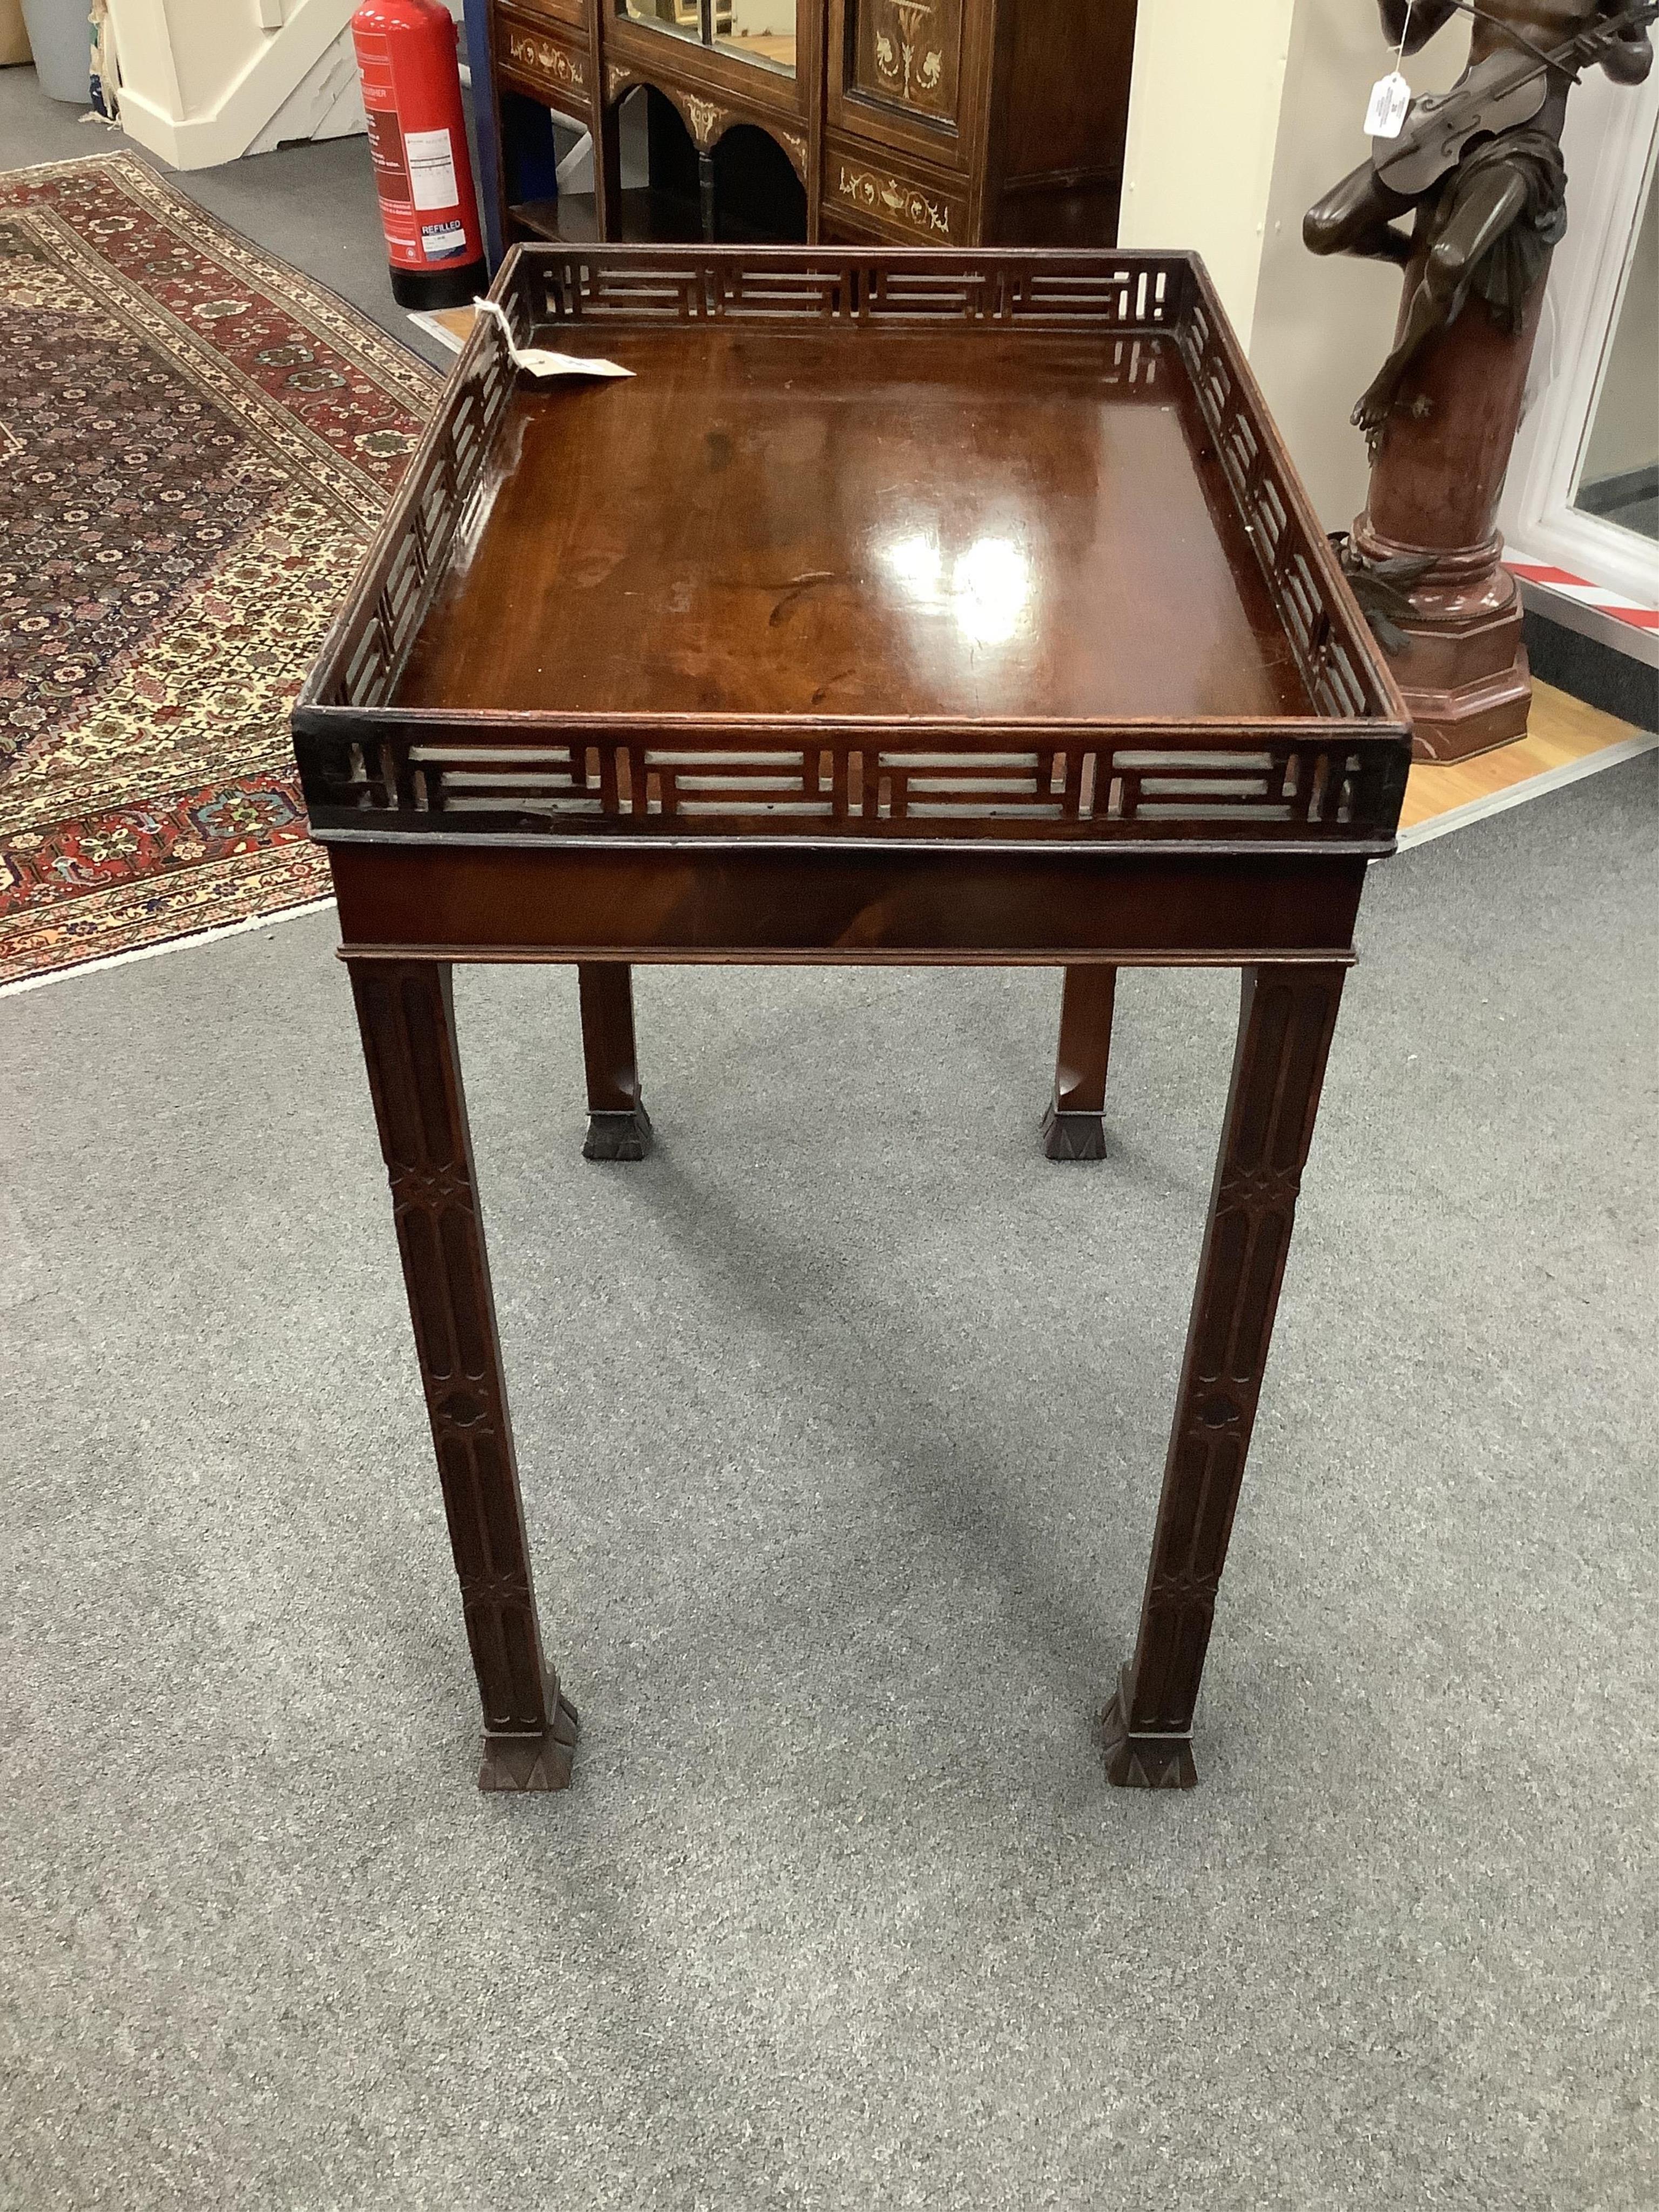 A George III Chippendale period rectangular mahogany silver table with white metal presentation plaque, width 64cm, depth 44cm, height 73cm. (restored). Condition - good